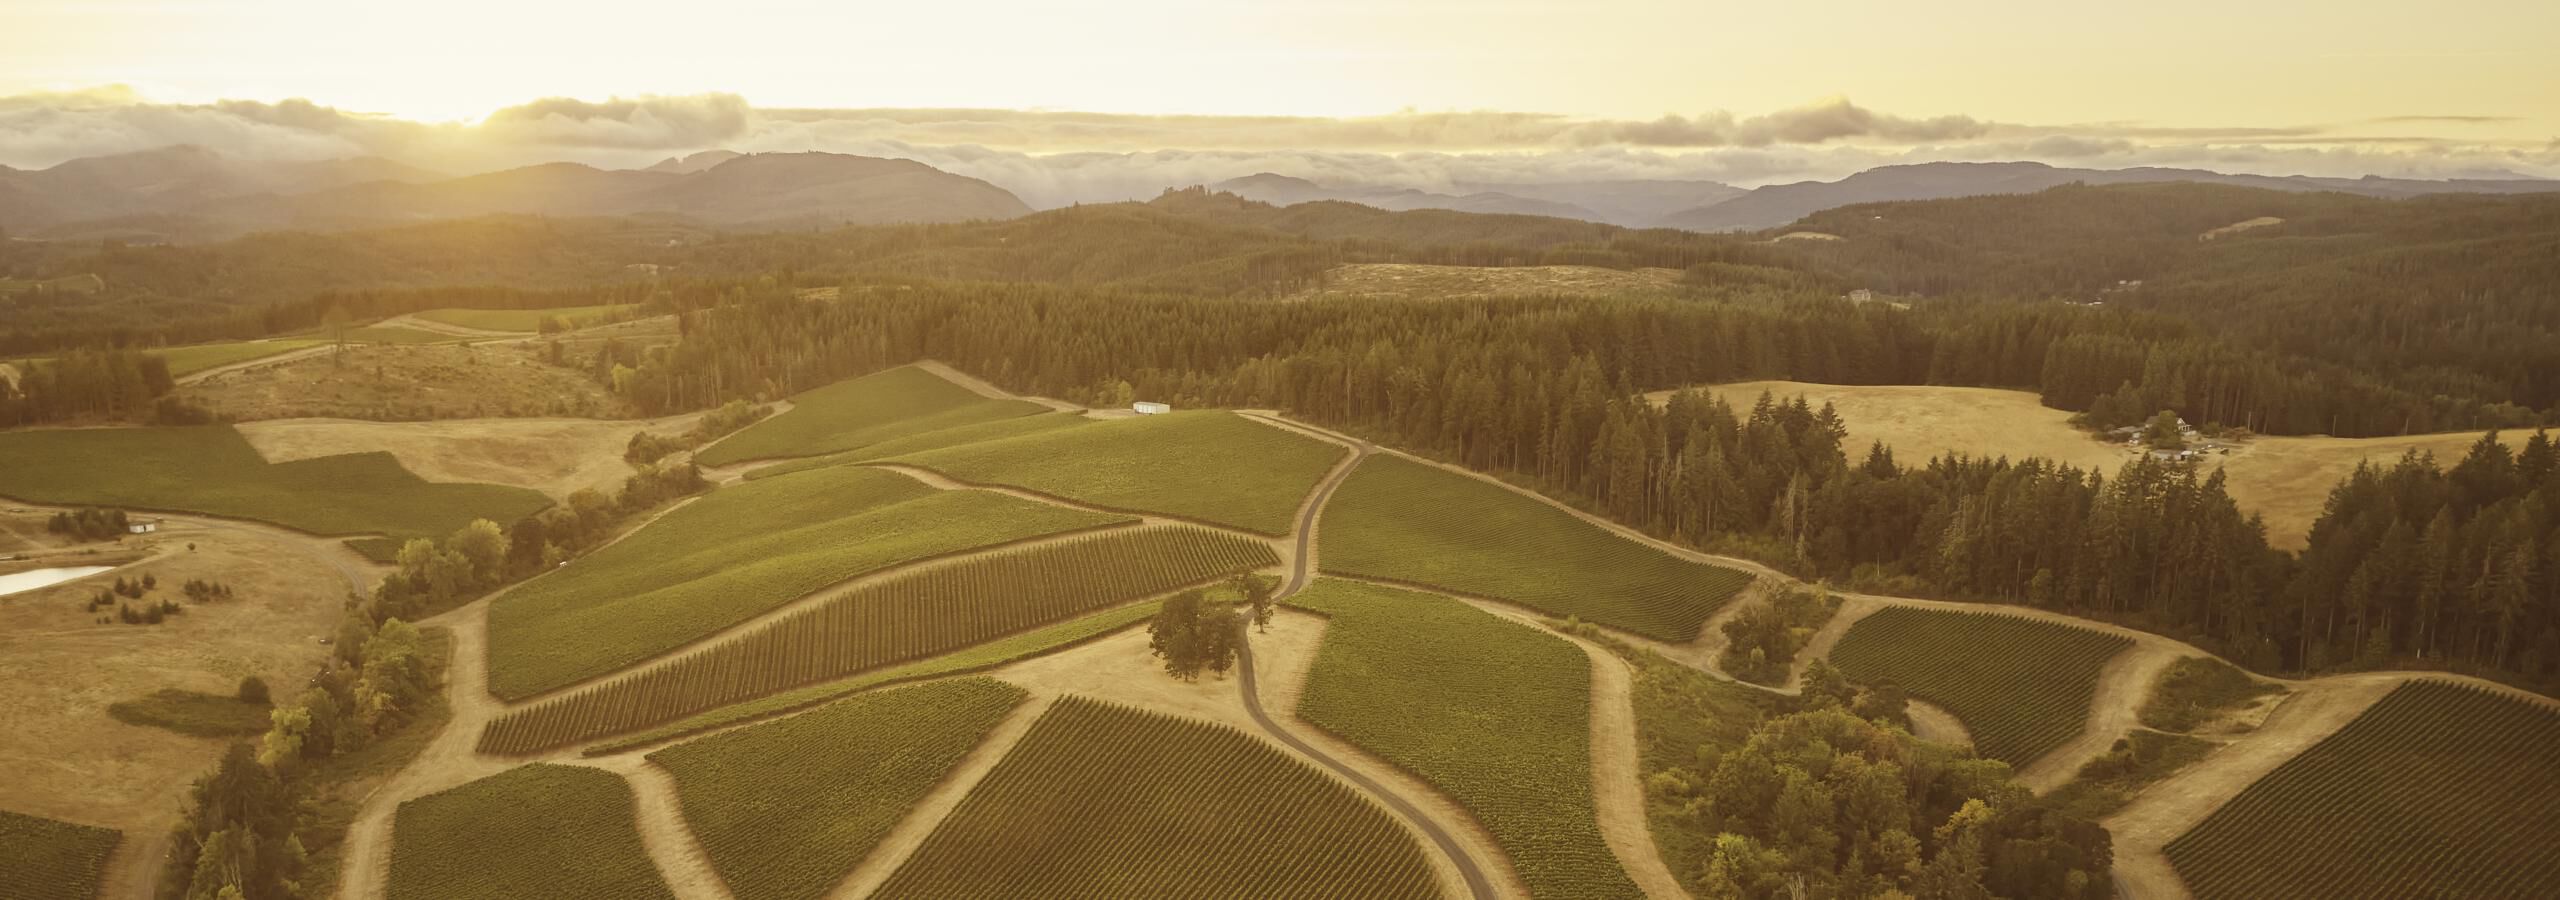 Gran Moraine Vineyard from the air during sunset